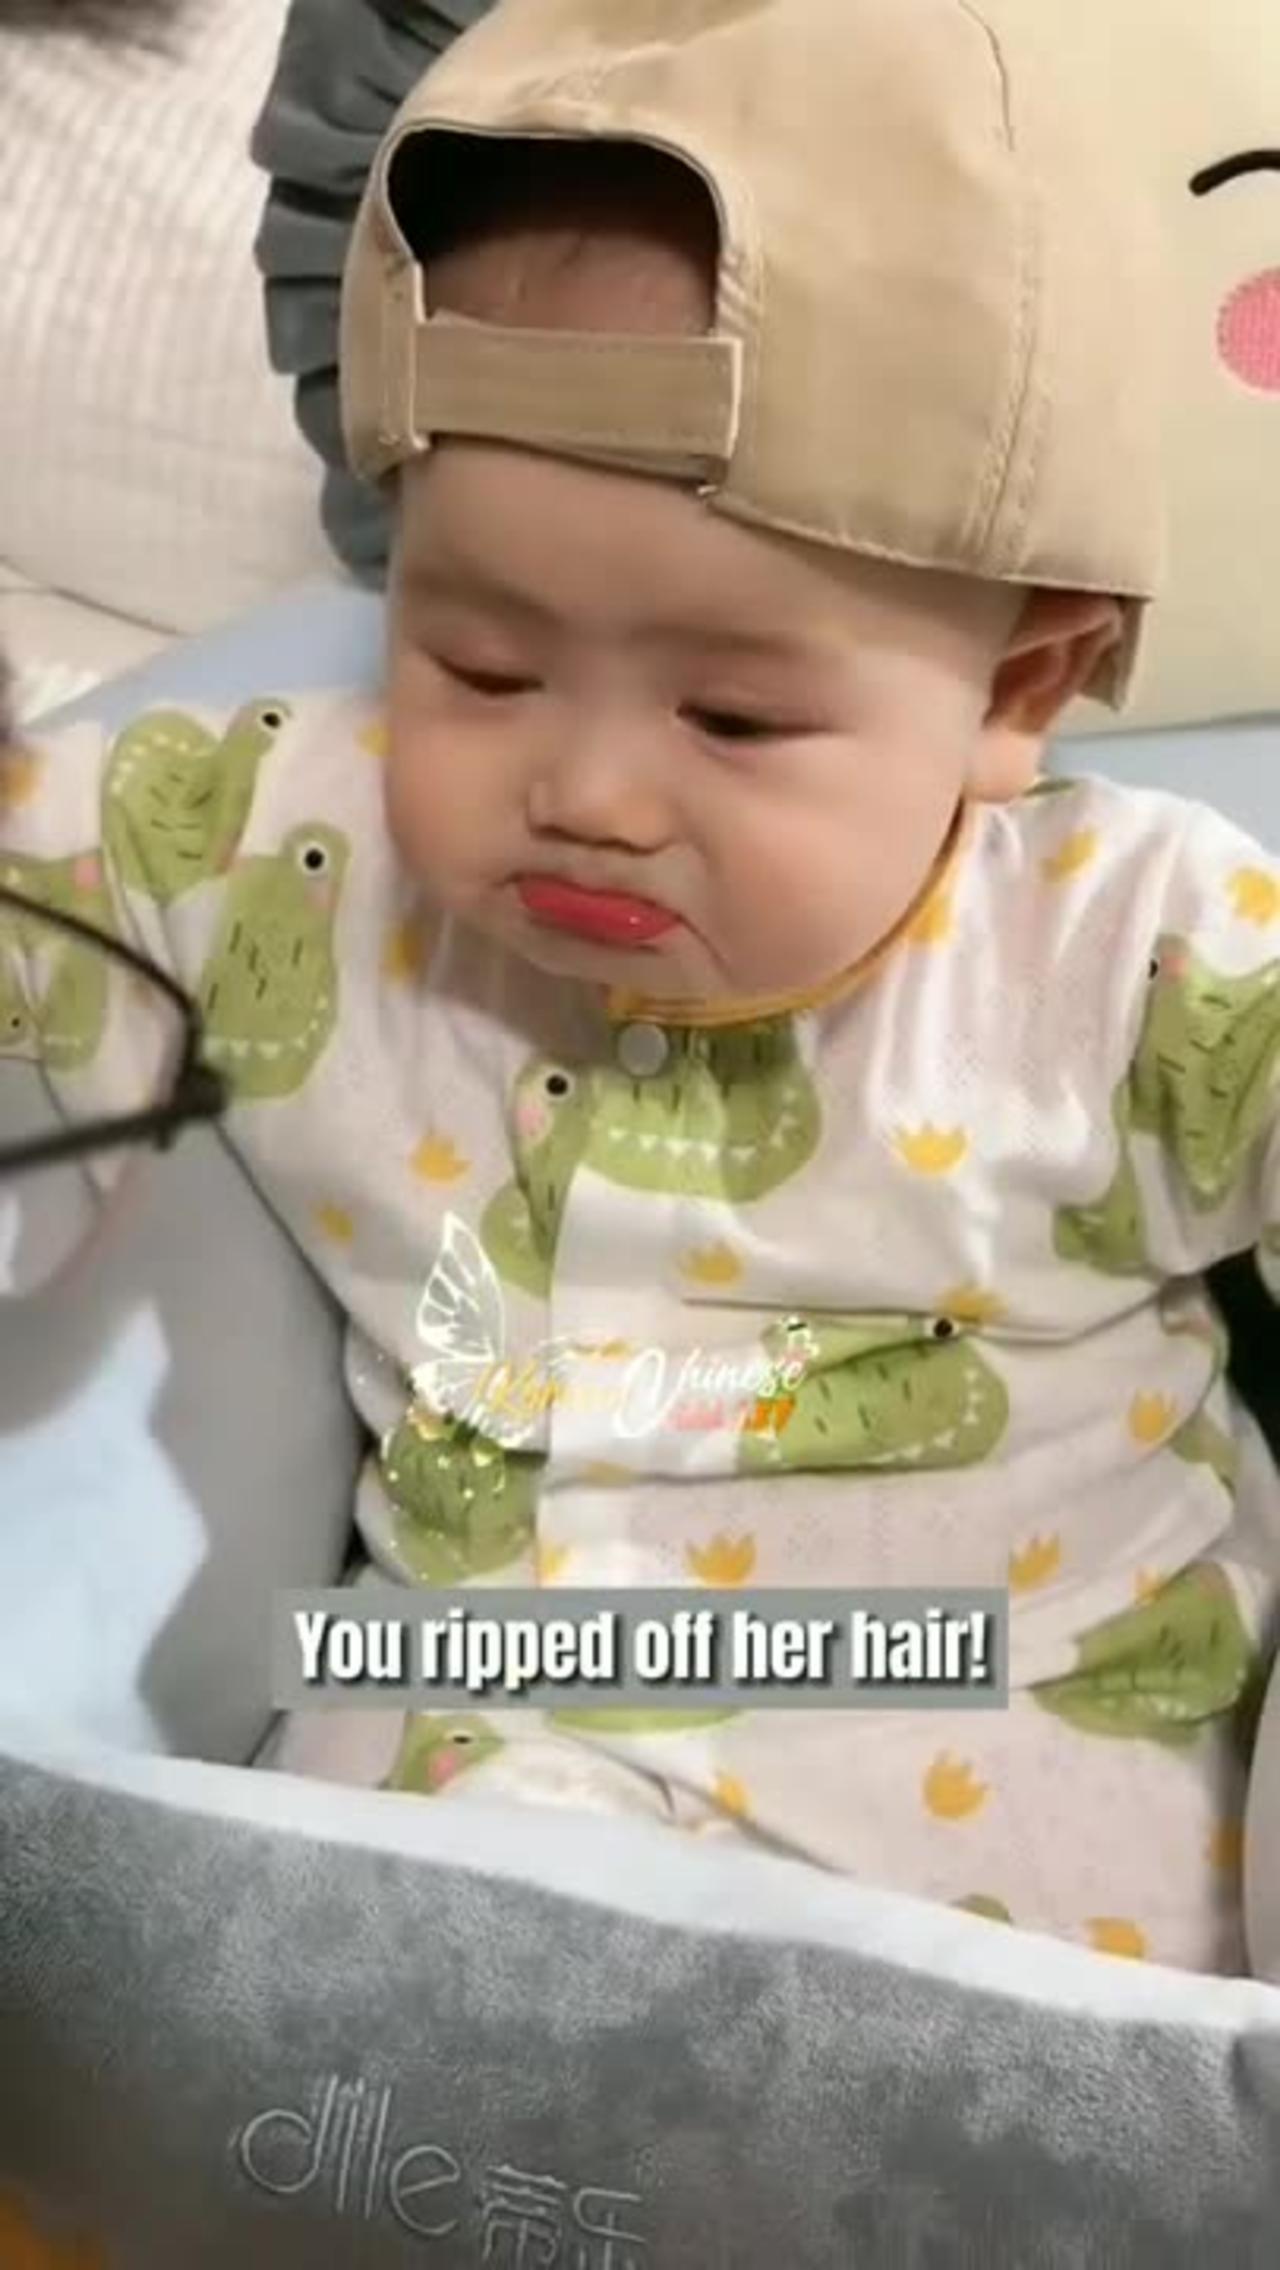 Adorable Baby moved to crying as Daddy scolds it😭 #shorts #cutebabies